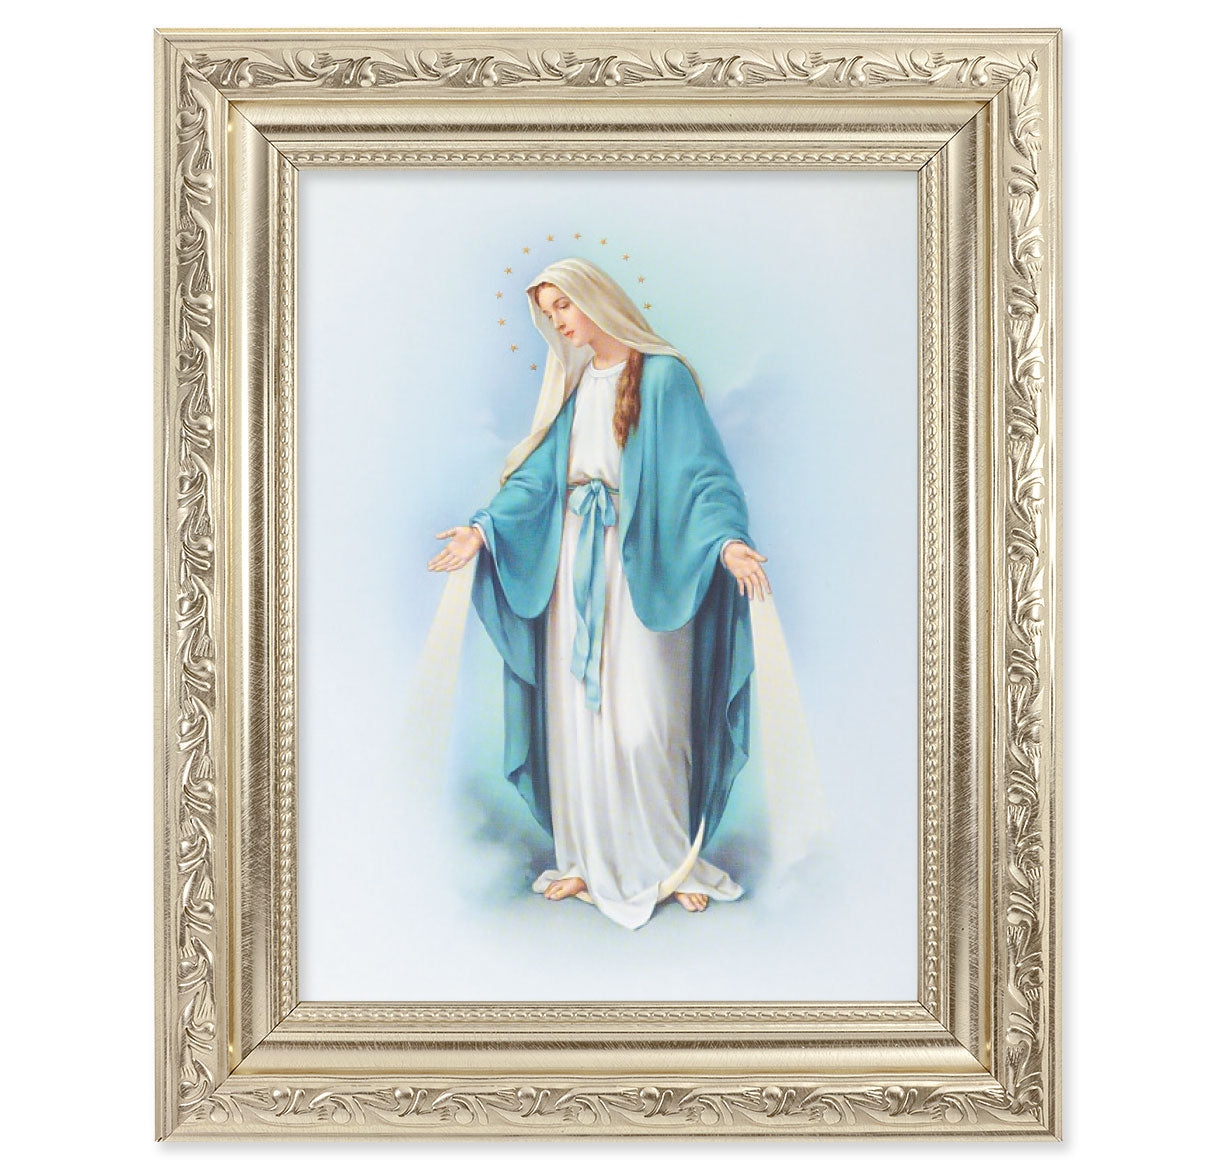 Our Lady of Grace Silver Framed Art